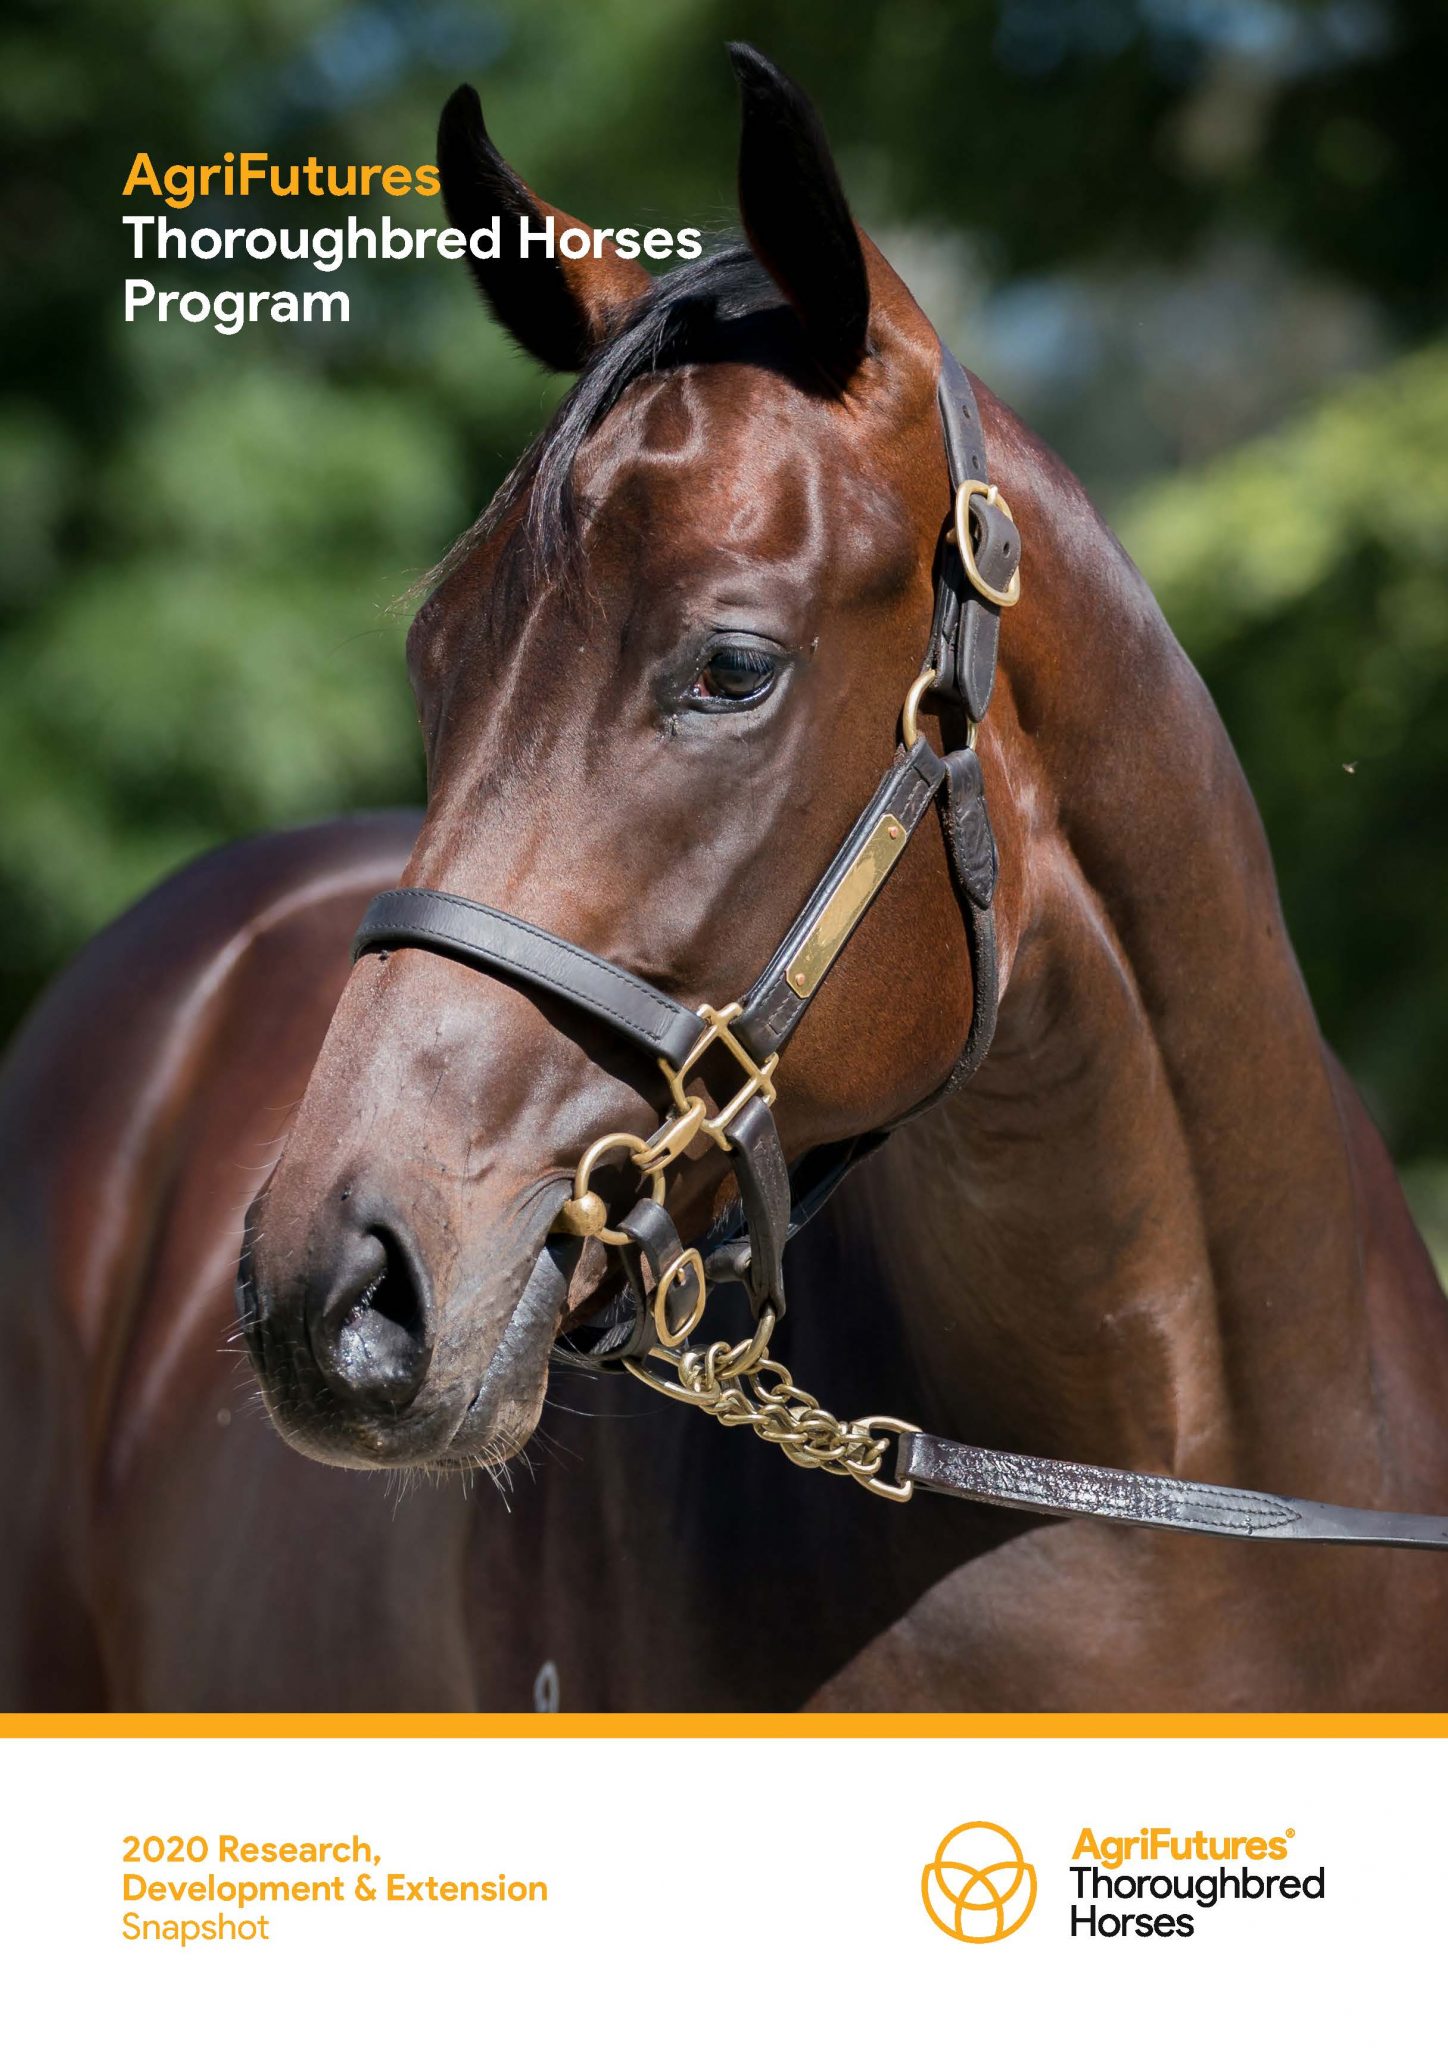 AgriFutures Thoroughbred Horses Program 2020 Research, Development & Extension Snapshot - image